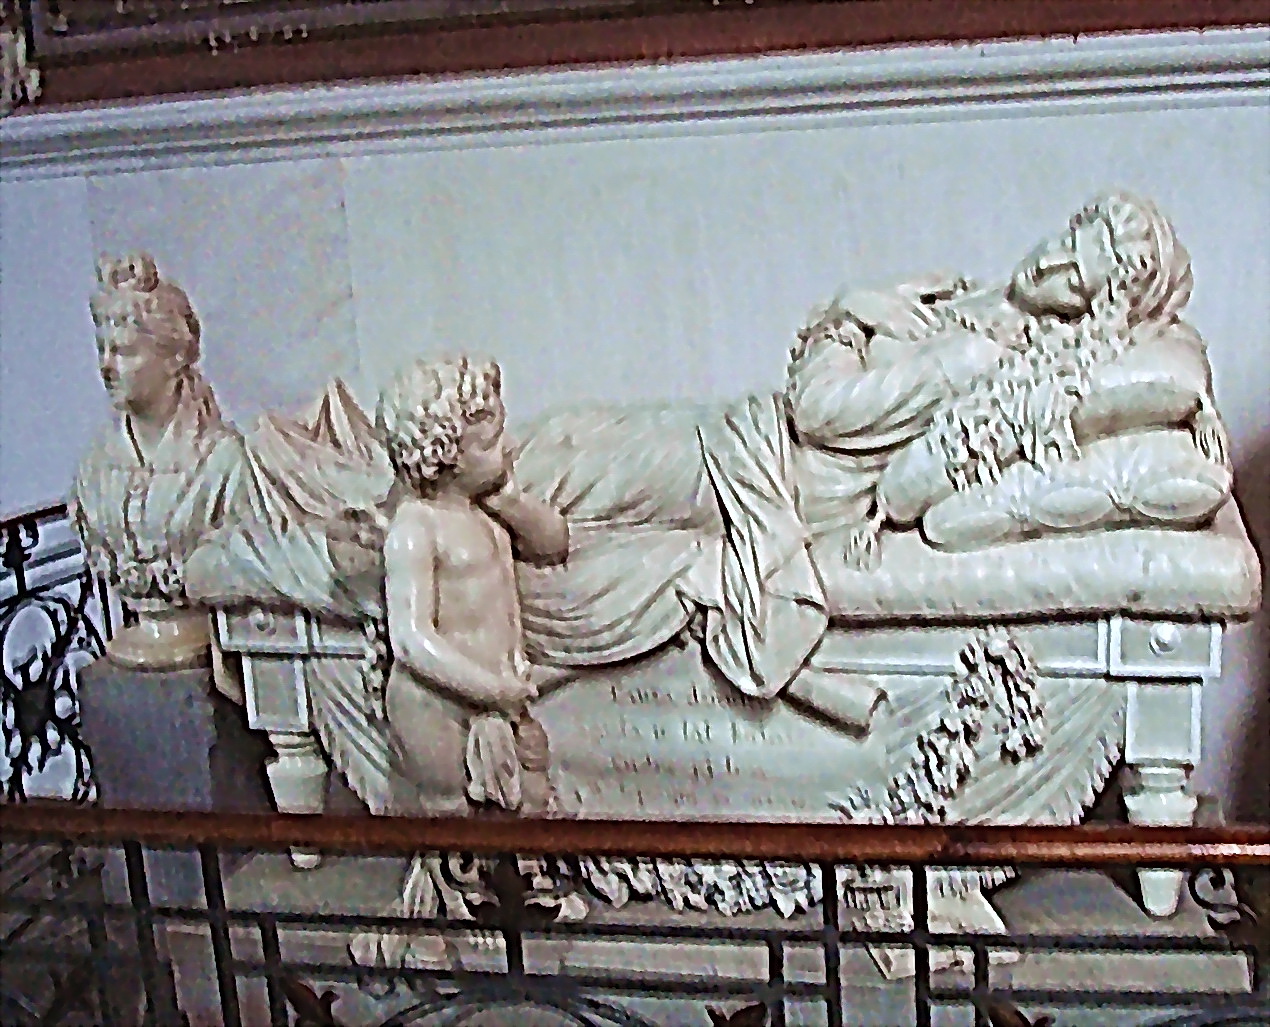 a picture of a statue of a man sleeping on a bed